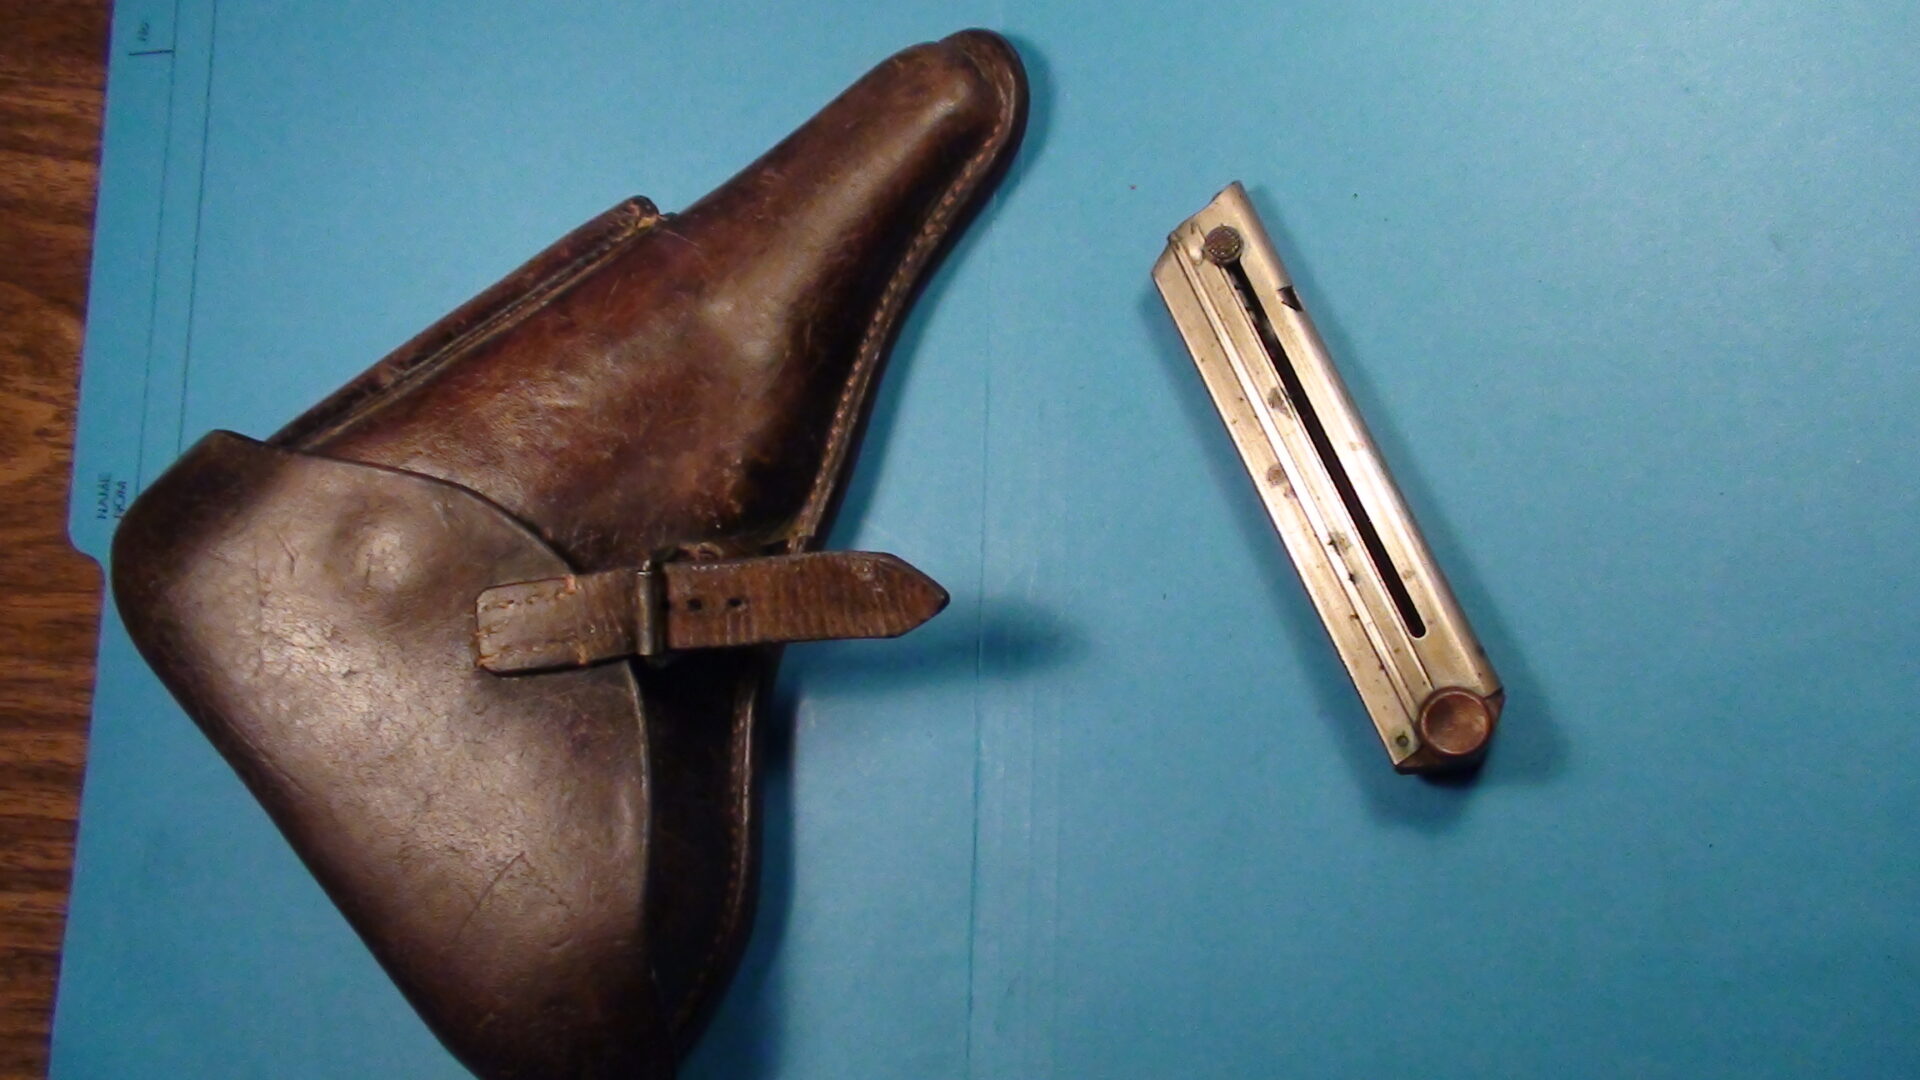 Luger Holster Dated 1911 with WW1 Luger Magazine....Both in good/very good original condition